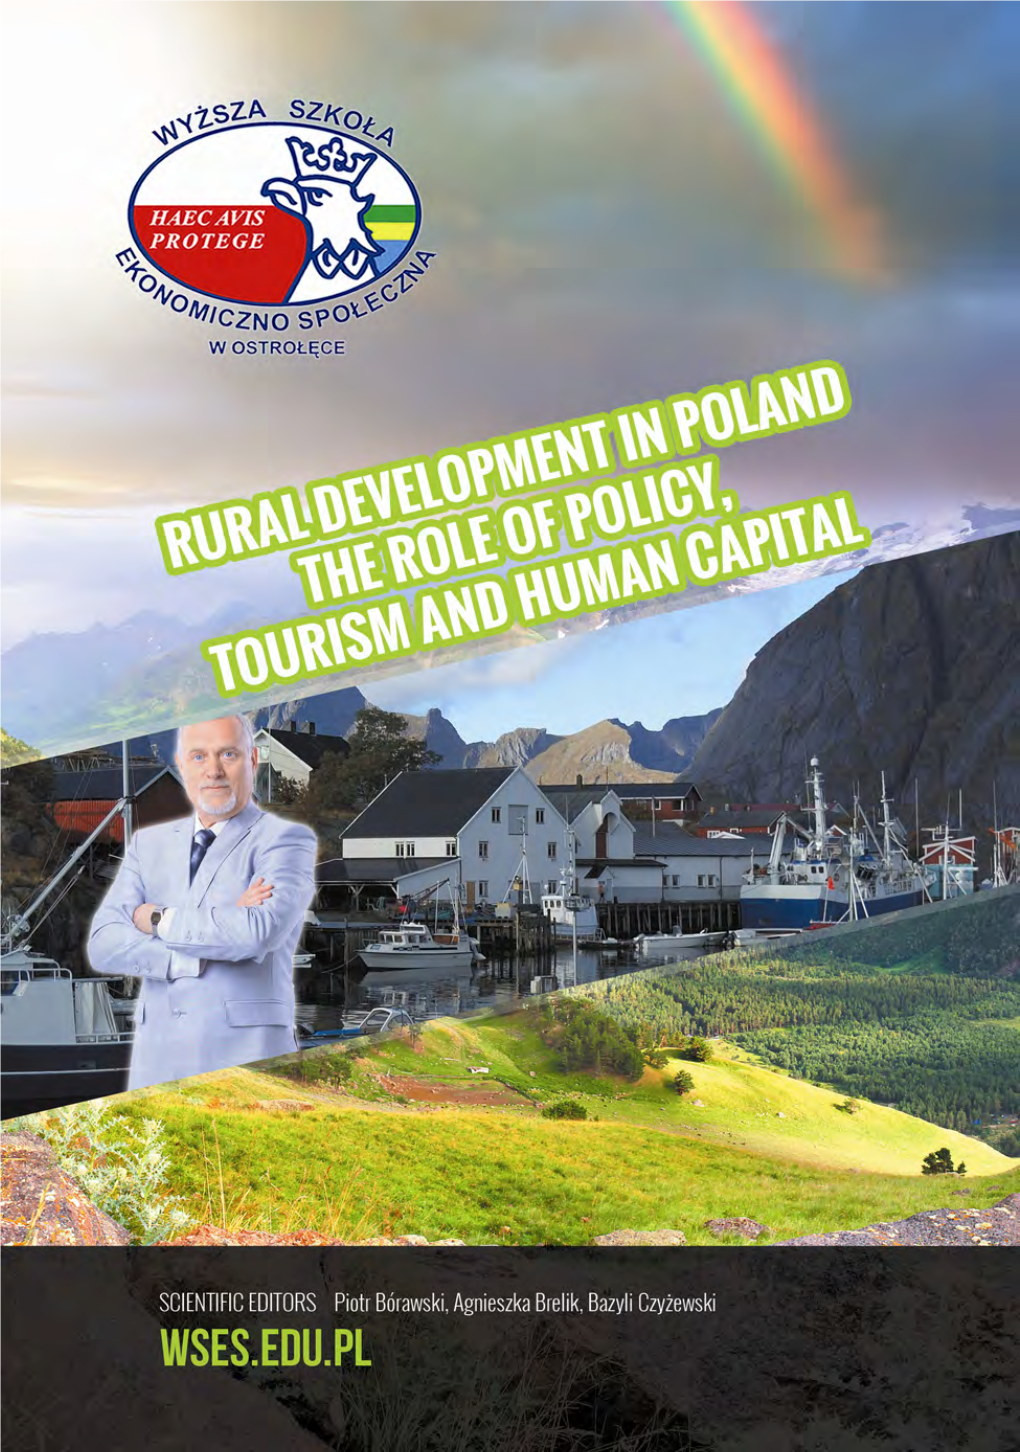 Rural Development in Poland the Role of Policy, Tourism and Human Capital